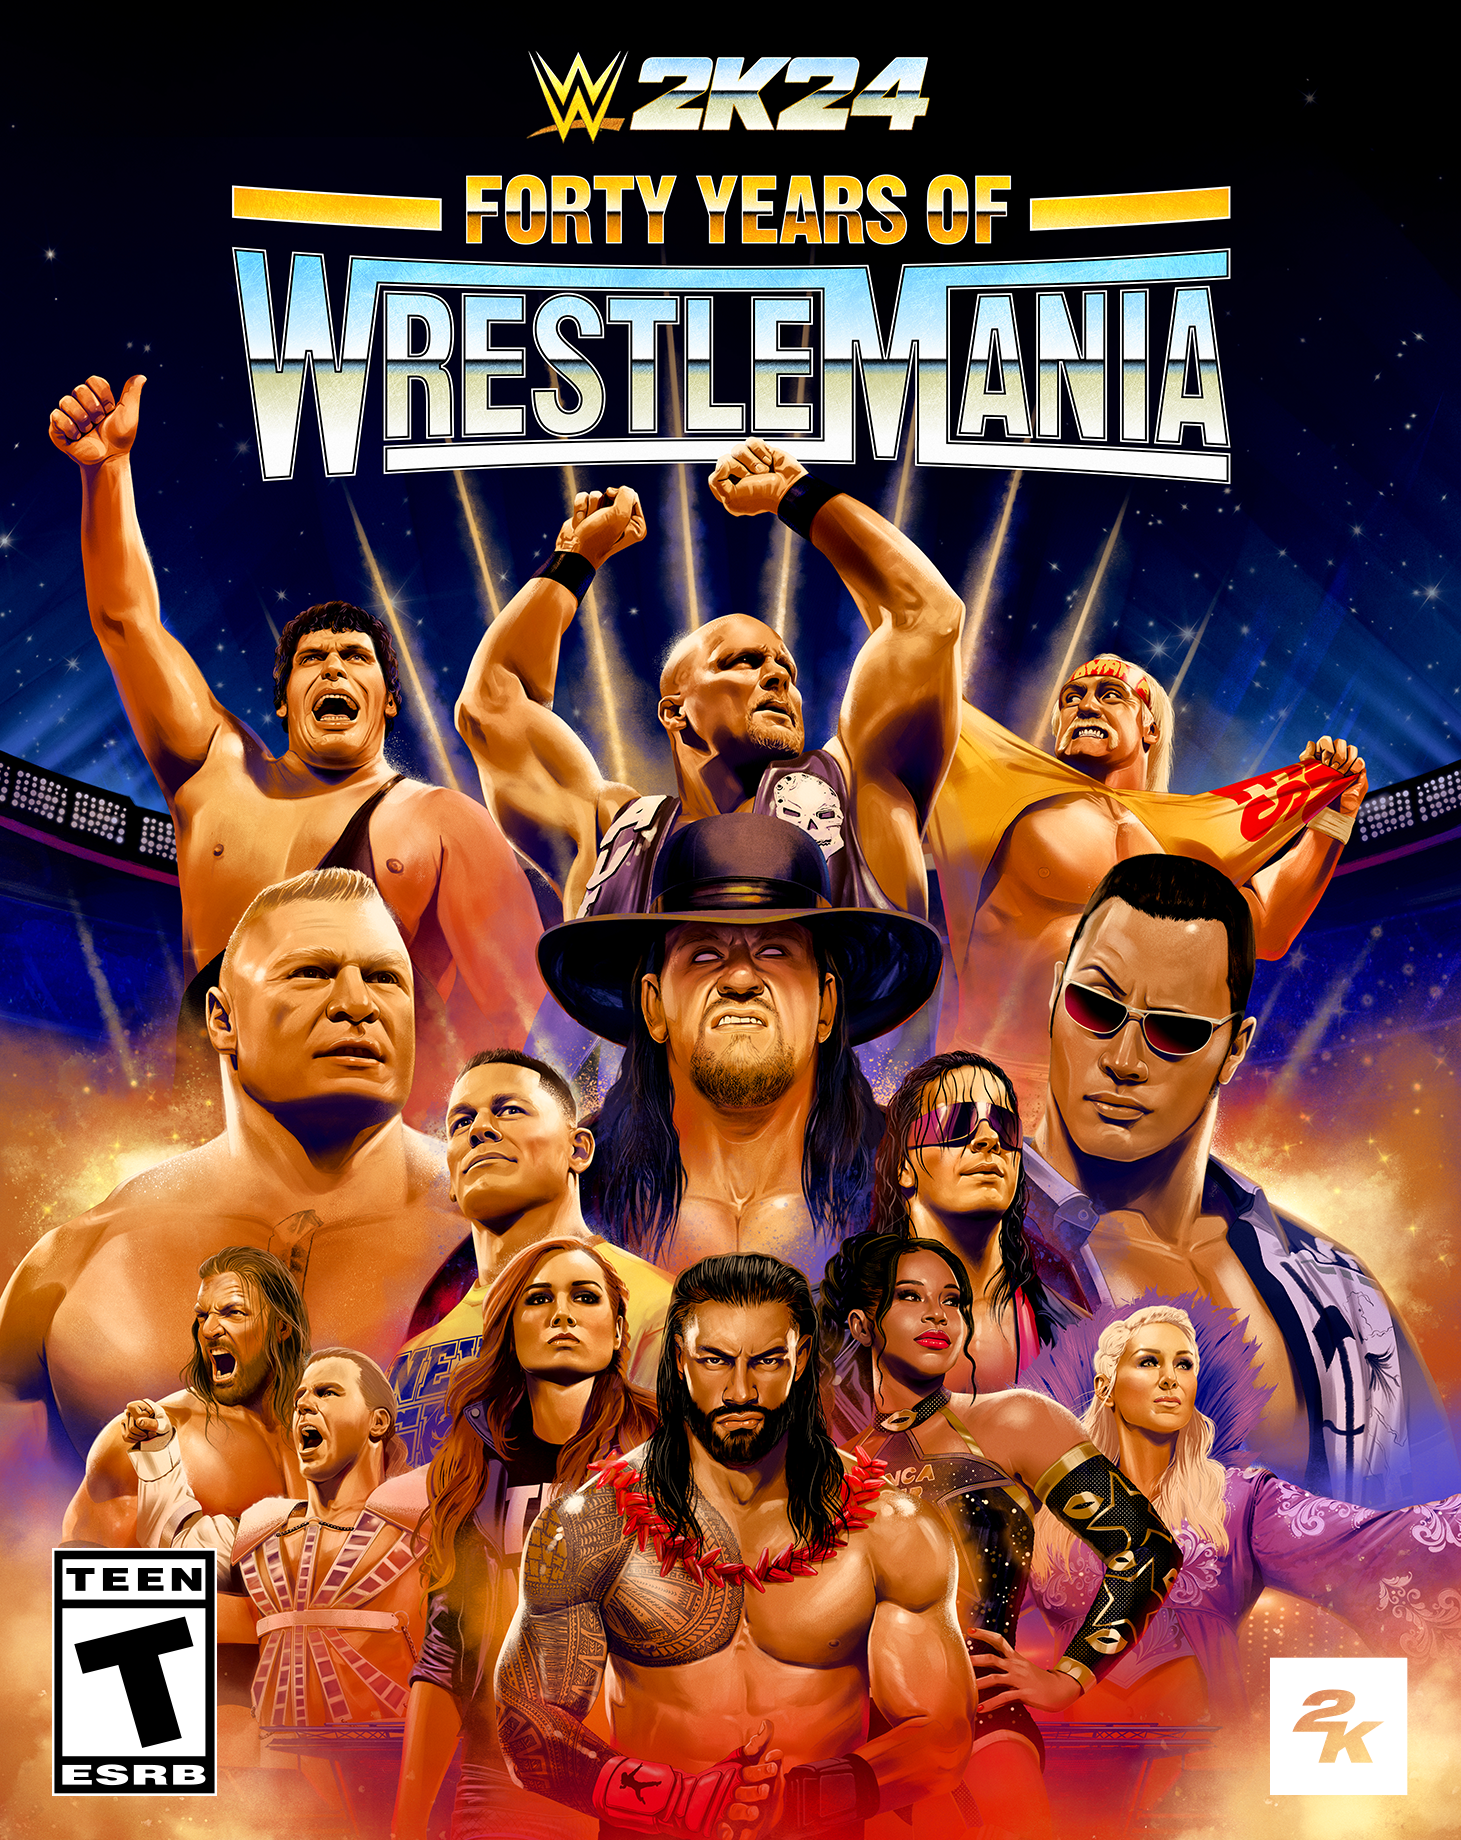 wwe-2k24-forty-years-of-wrestlemania-cover-art.png